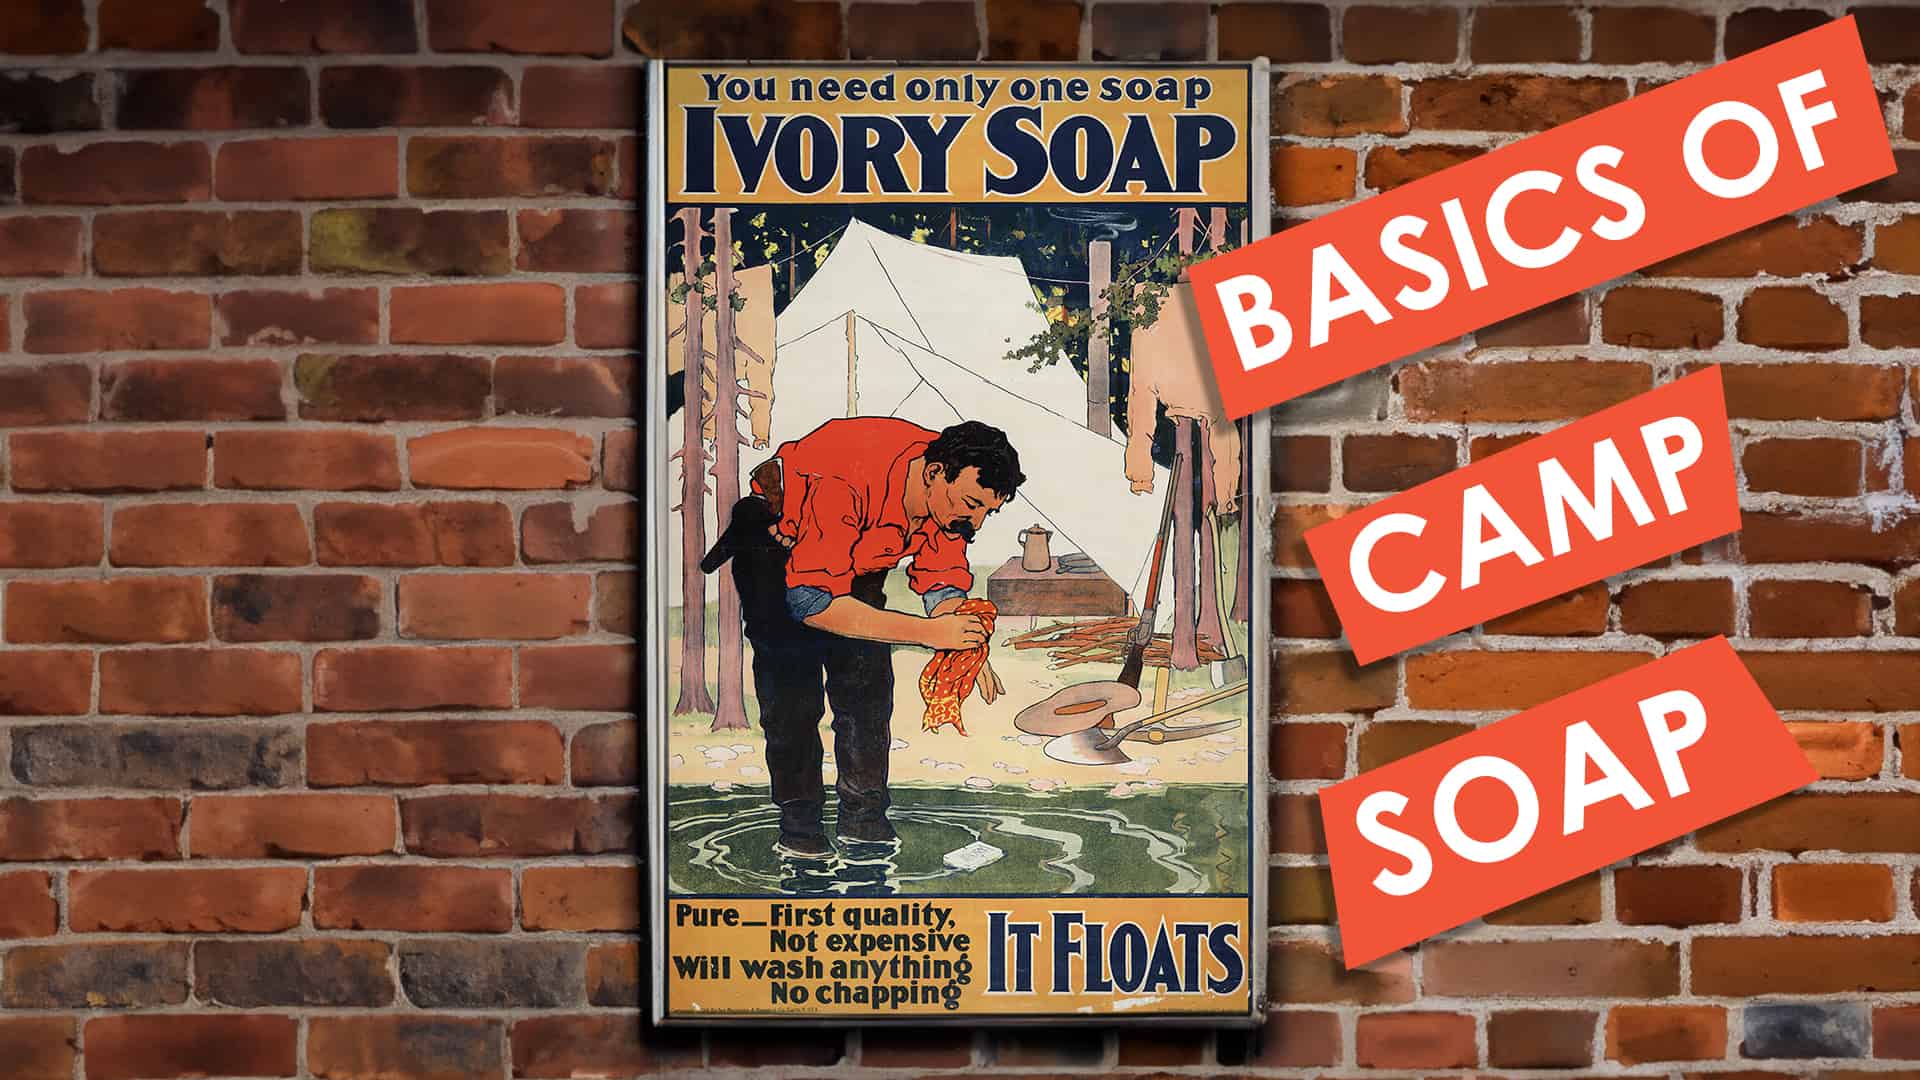 The Basics of Camp Soap: A Brief History of Camp Soap